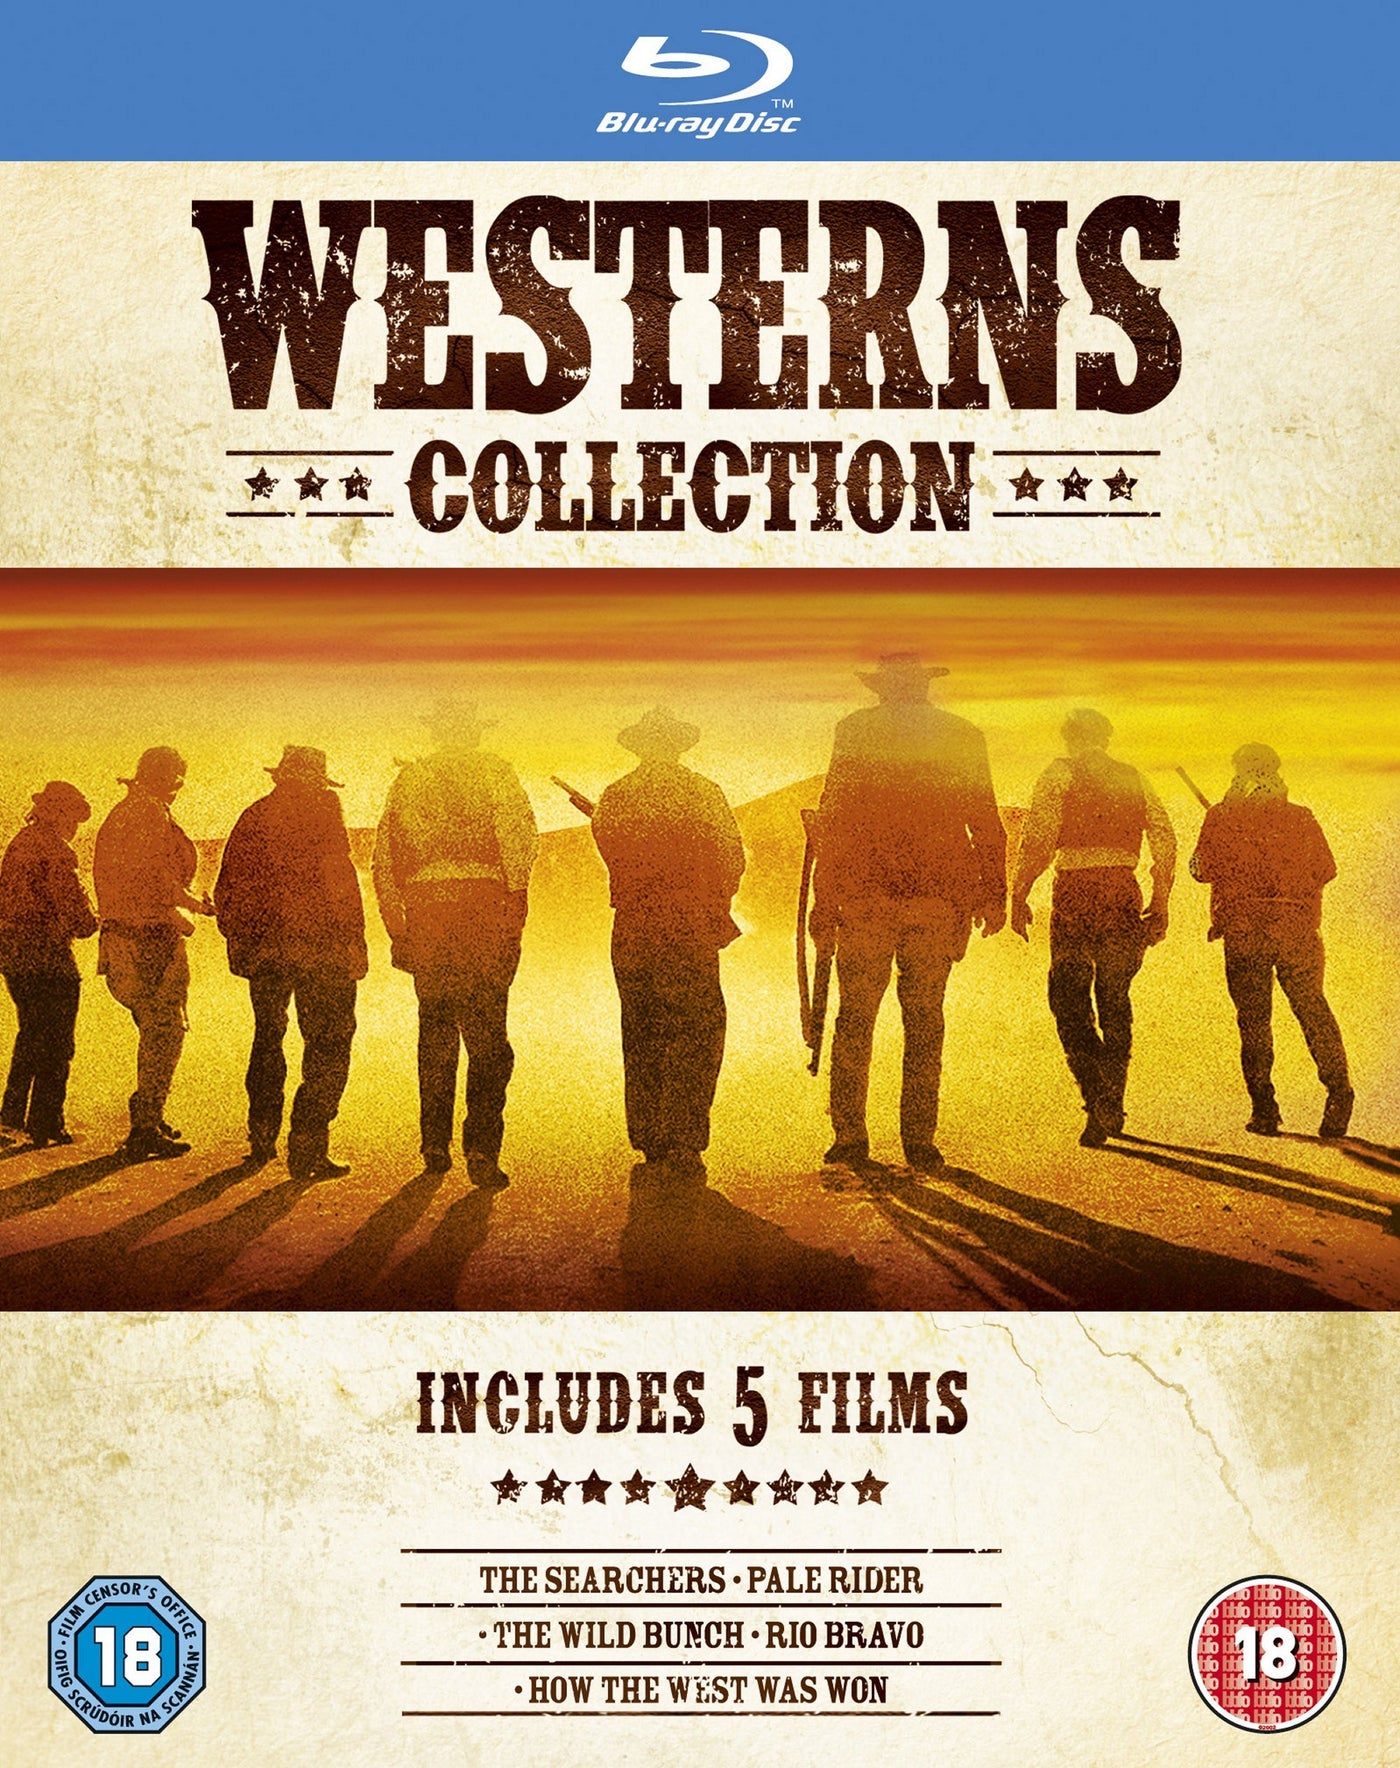 Westerns Collection (Blu-ray)